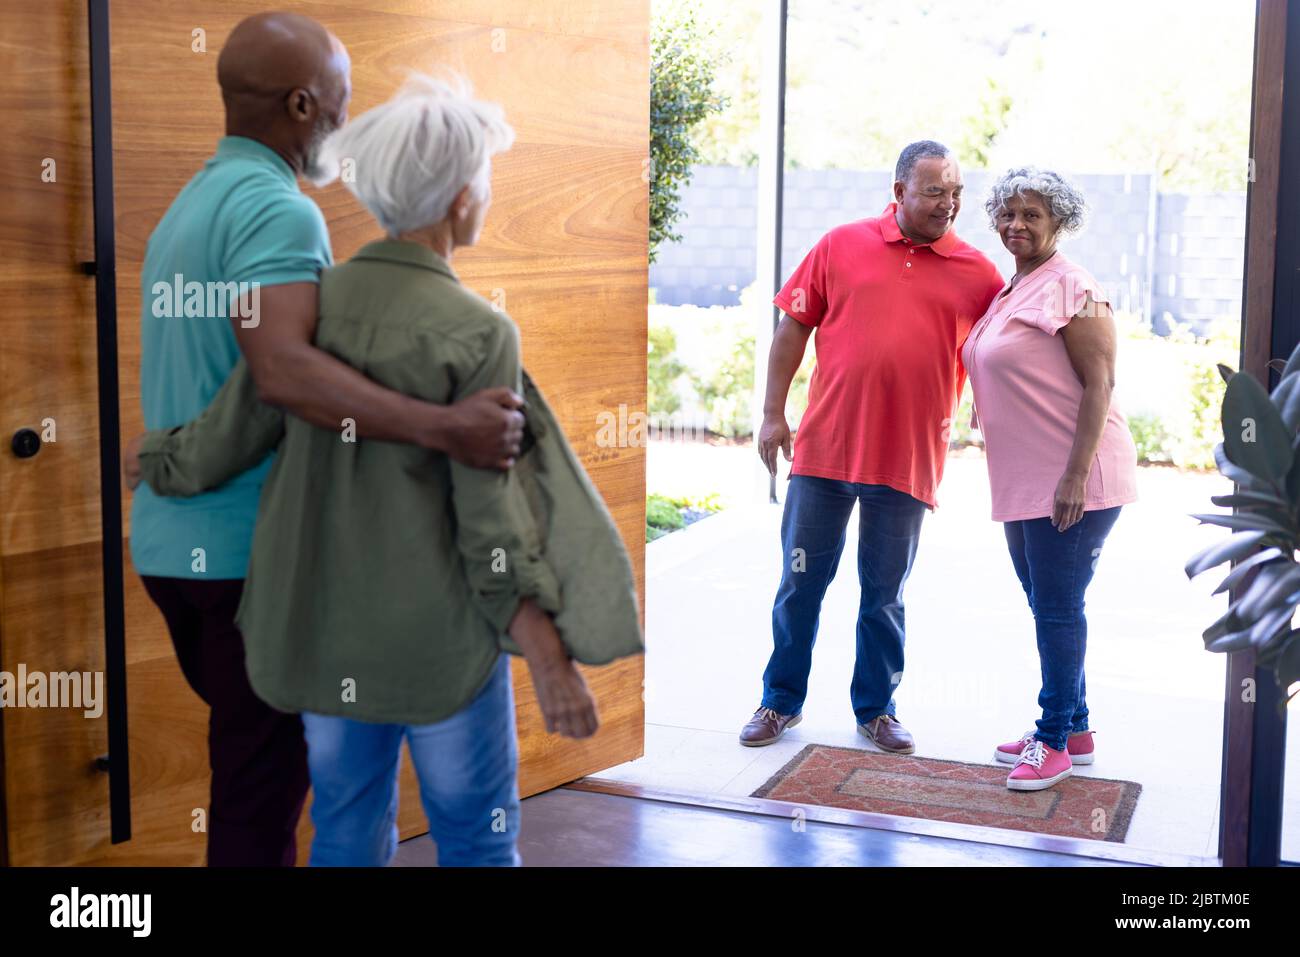 Multiracial seniors welcoming friends while standing at open entrance in retirement home Stock Photo